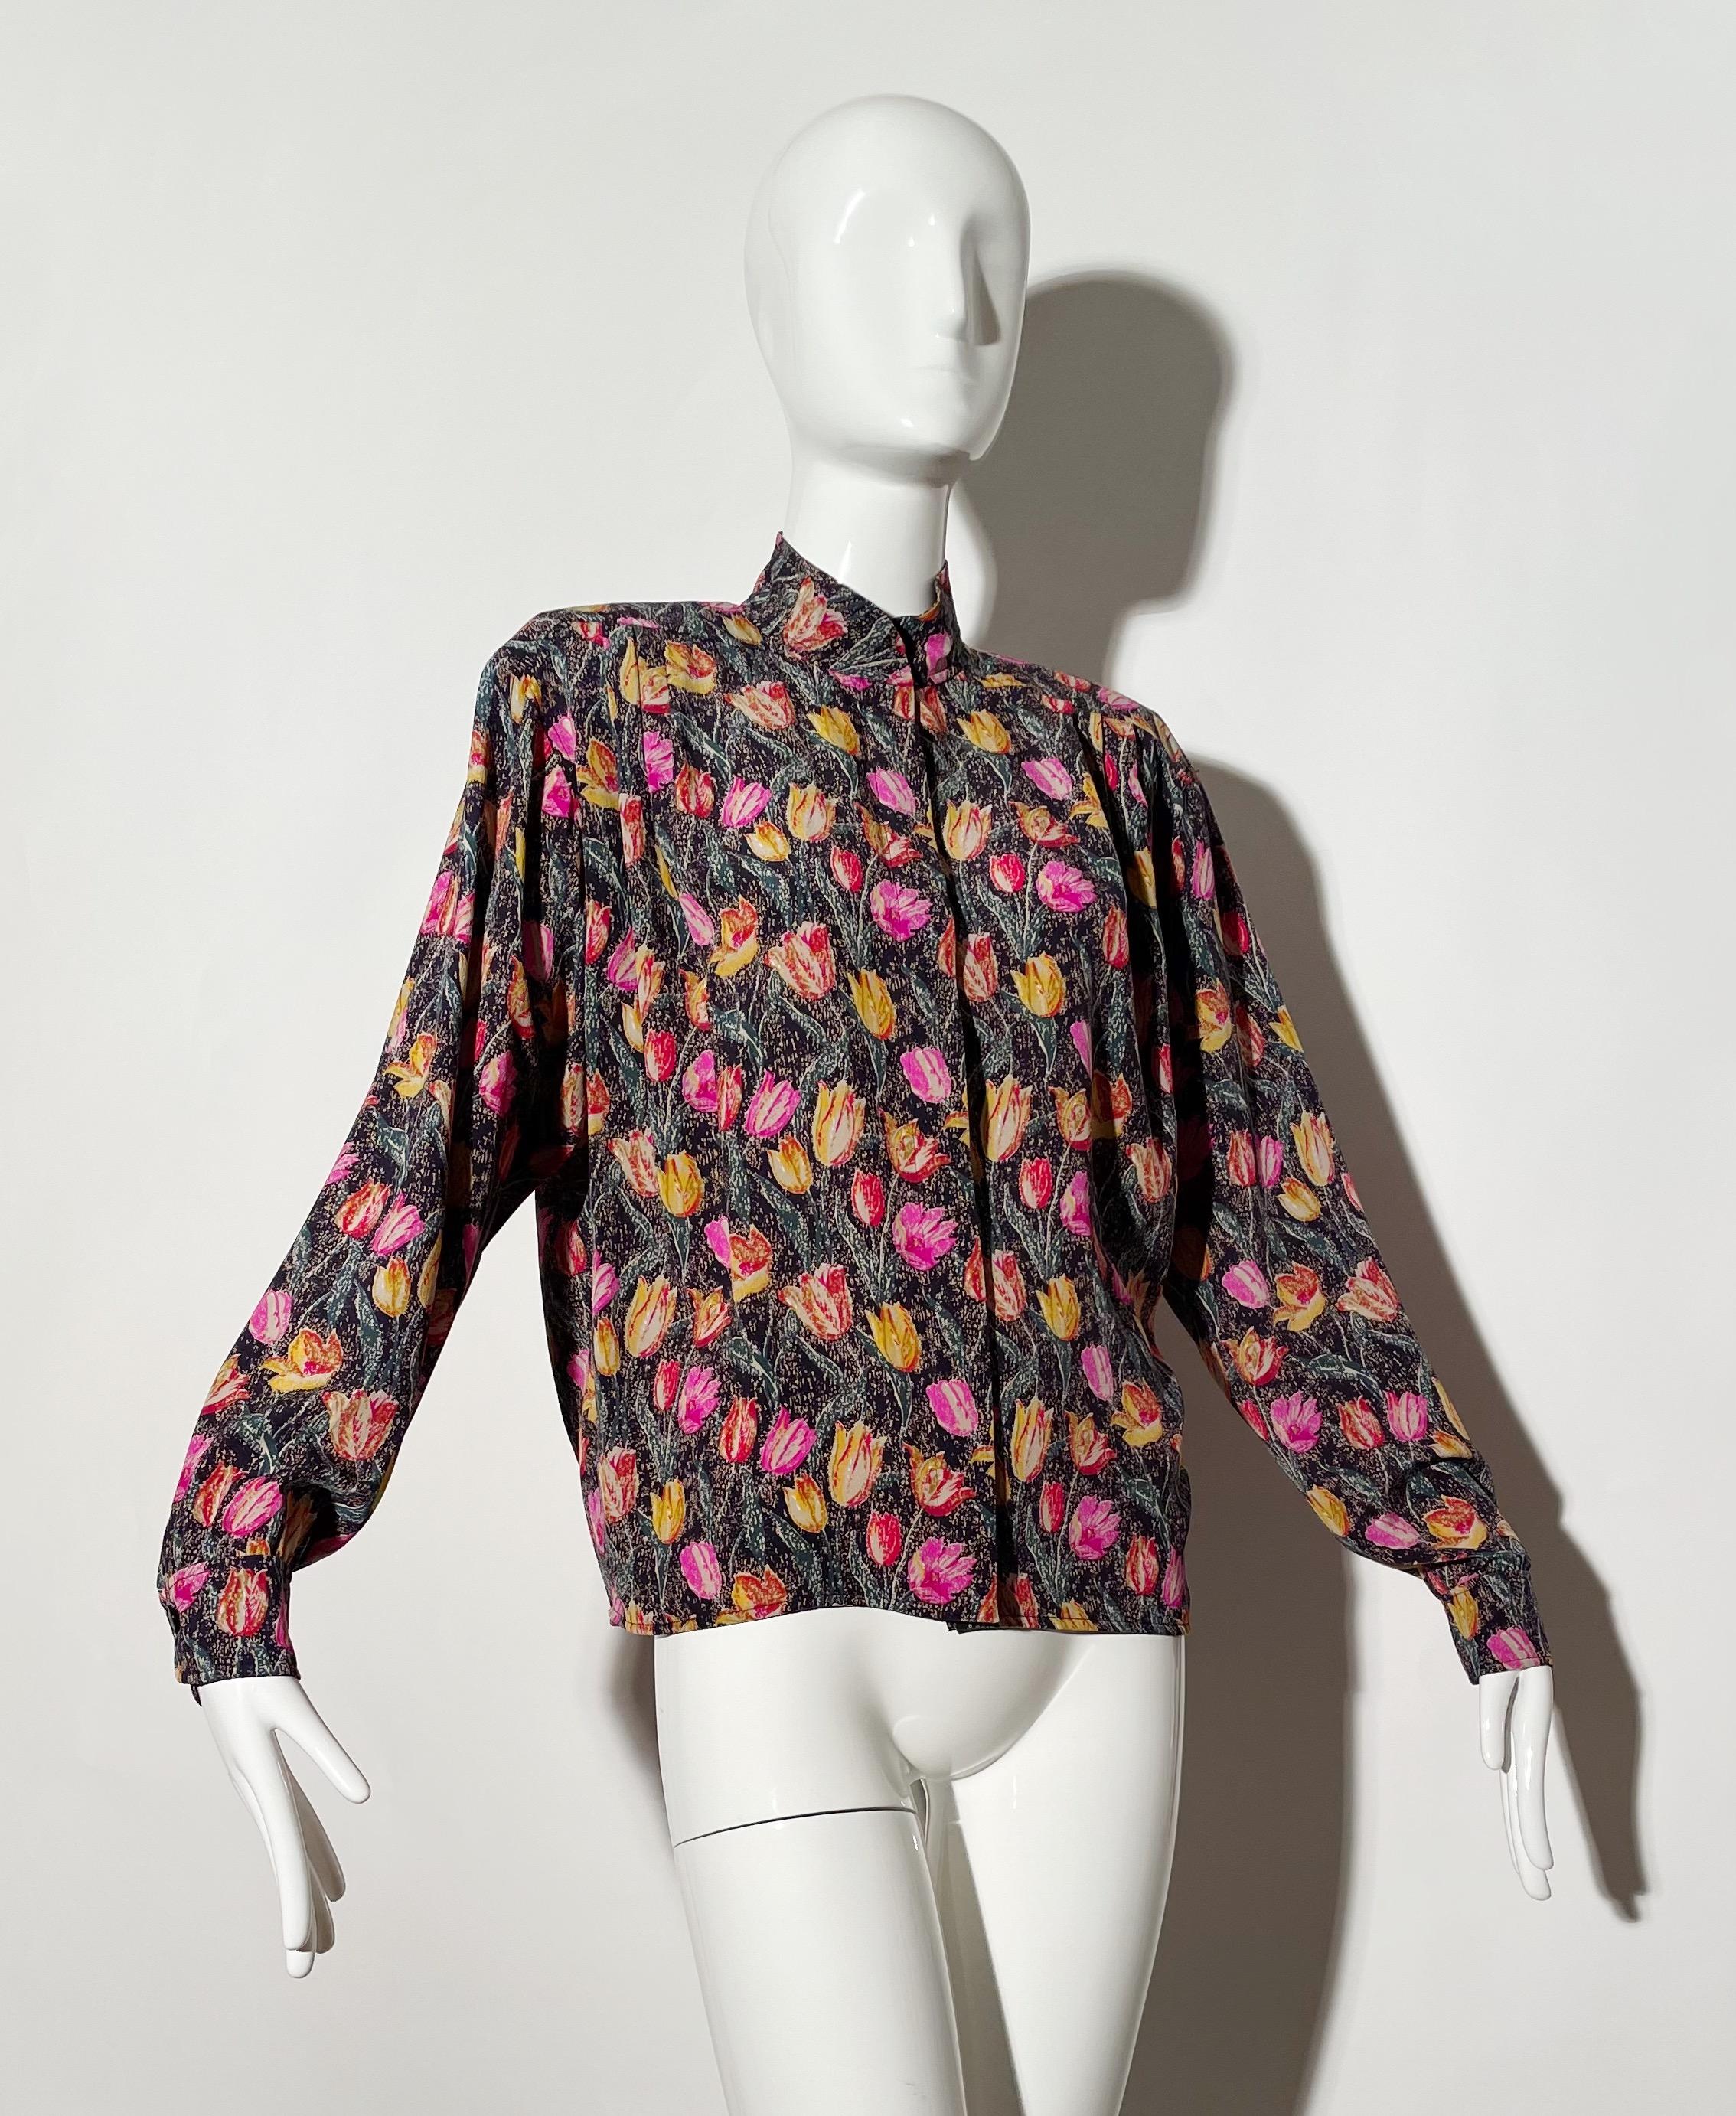 Emanuel Ungaro Floral Silk Blouse In Excellent Condition For Sale In Waterford, MI